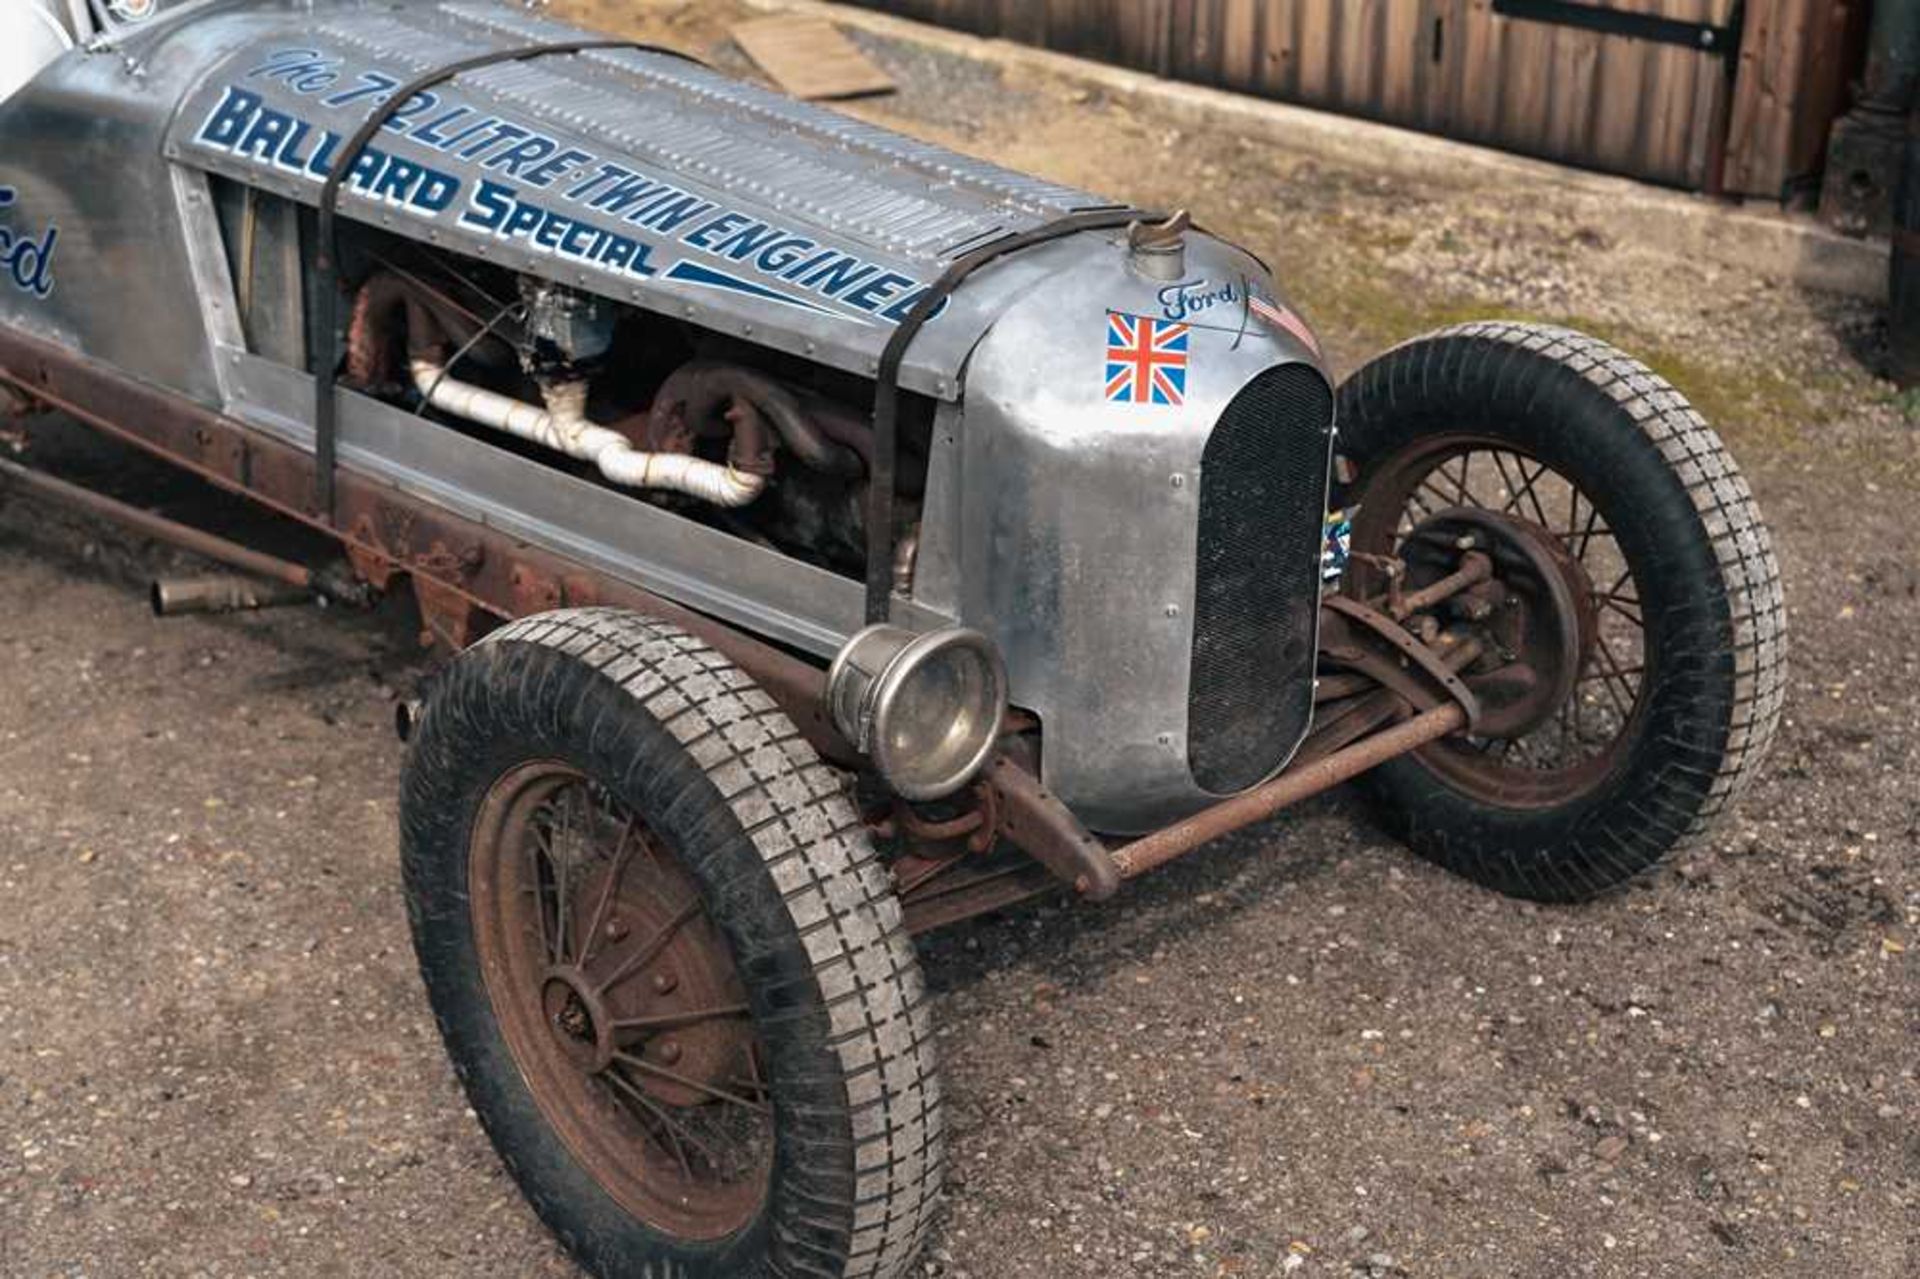 1930 Ford Model A "The Ballard Special" Speedster One off, bespoke built twin-engined pre-war racing - Image 39 of 94